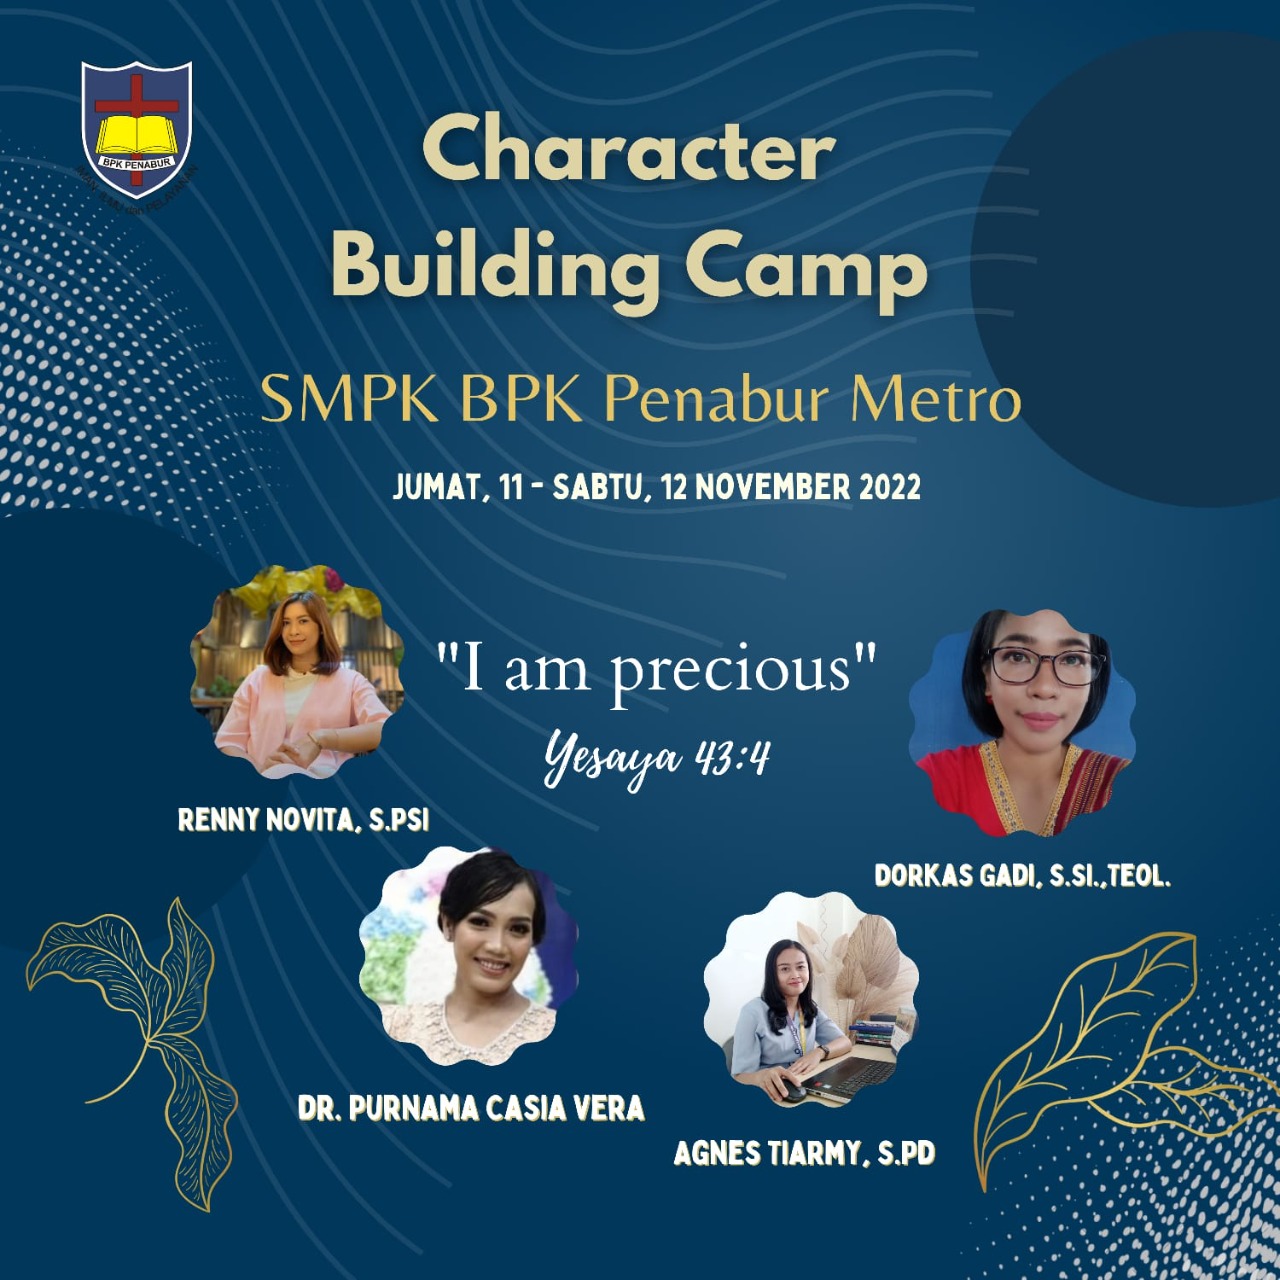 CHARACTER BUILDING CAMP 2022